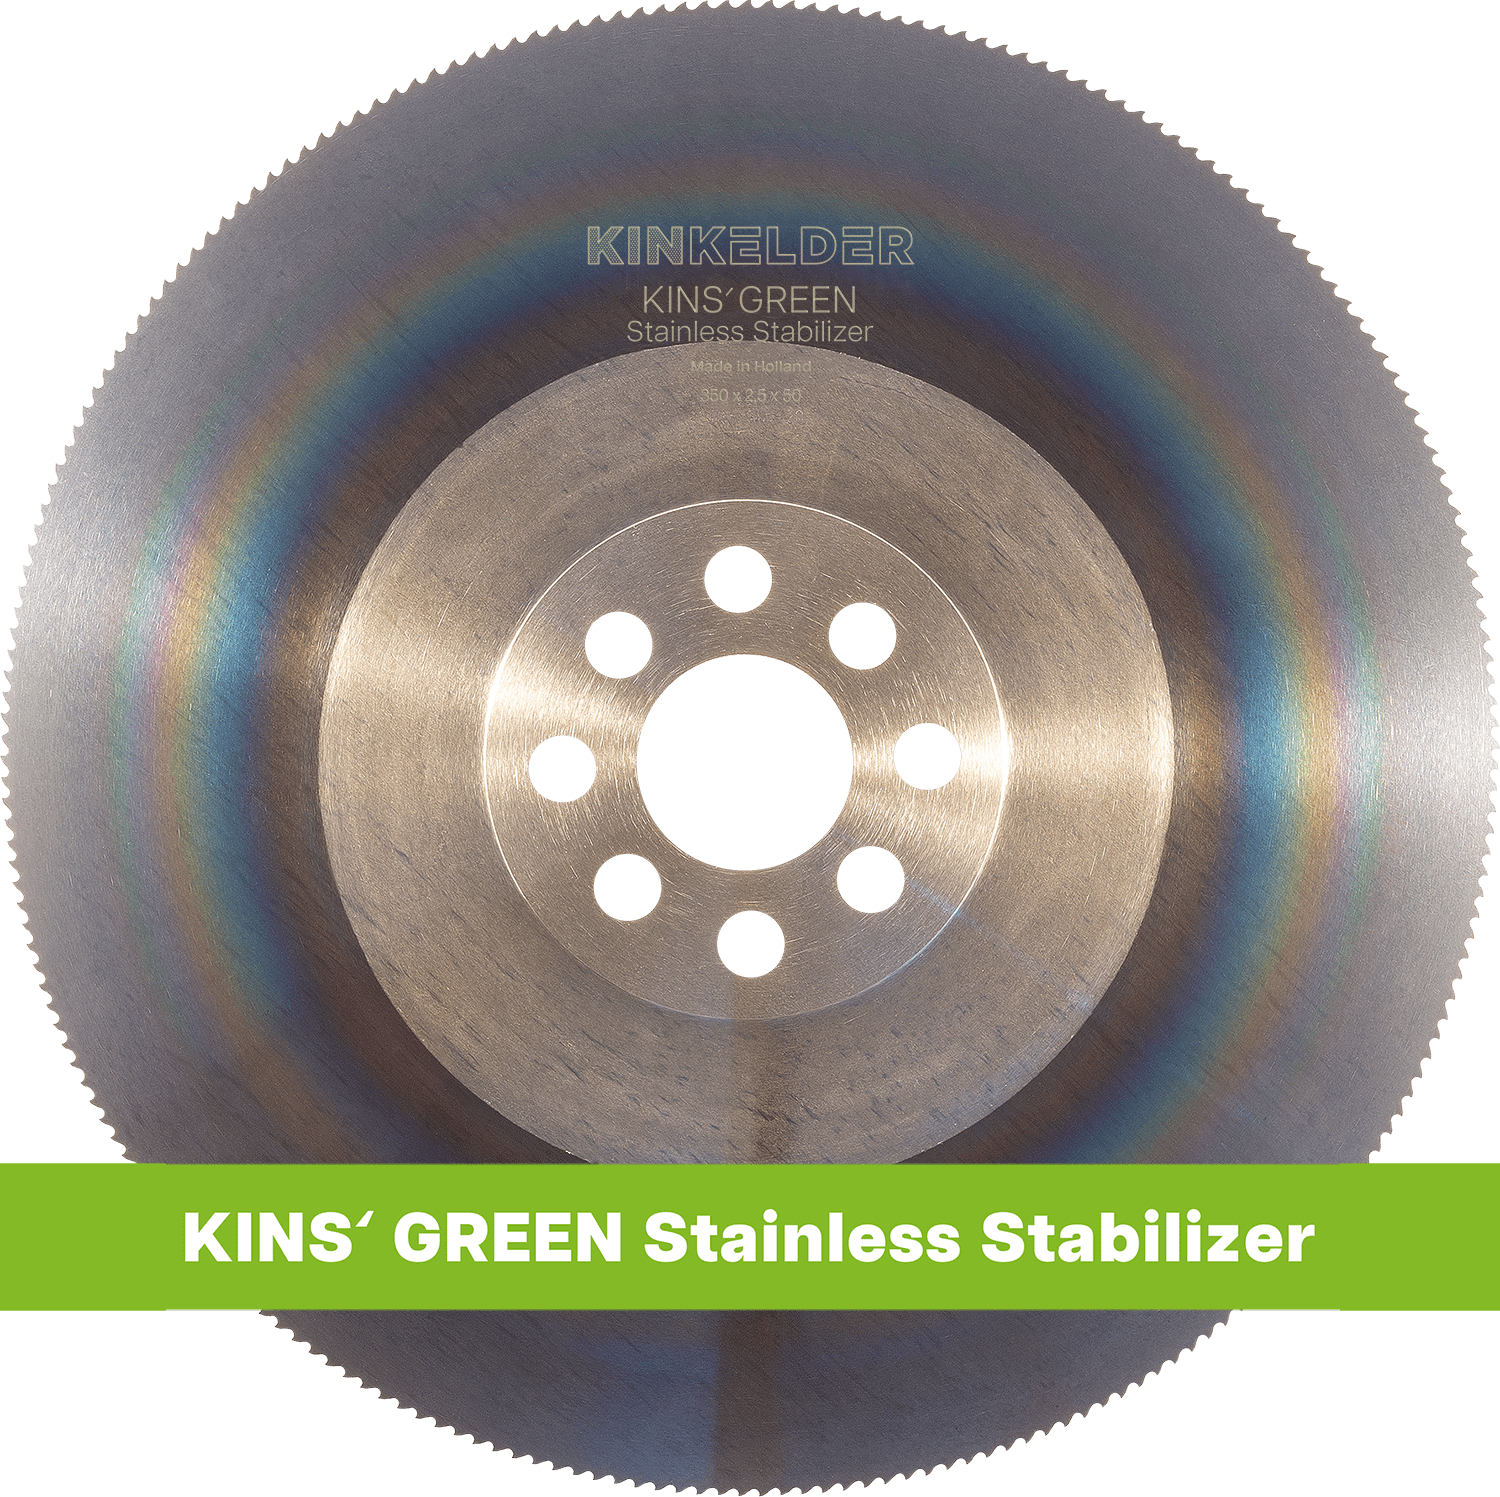 KINS‘ GREEN Stainless Stabilizer